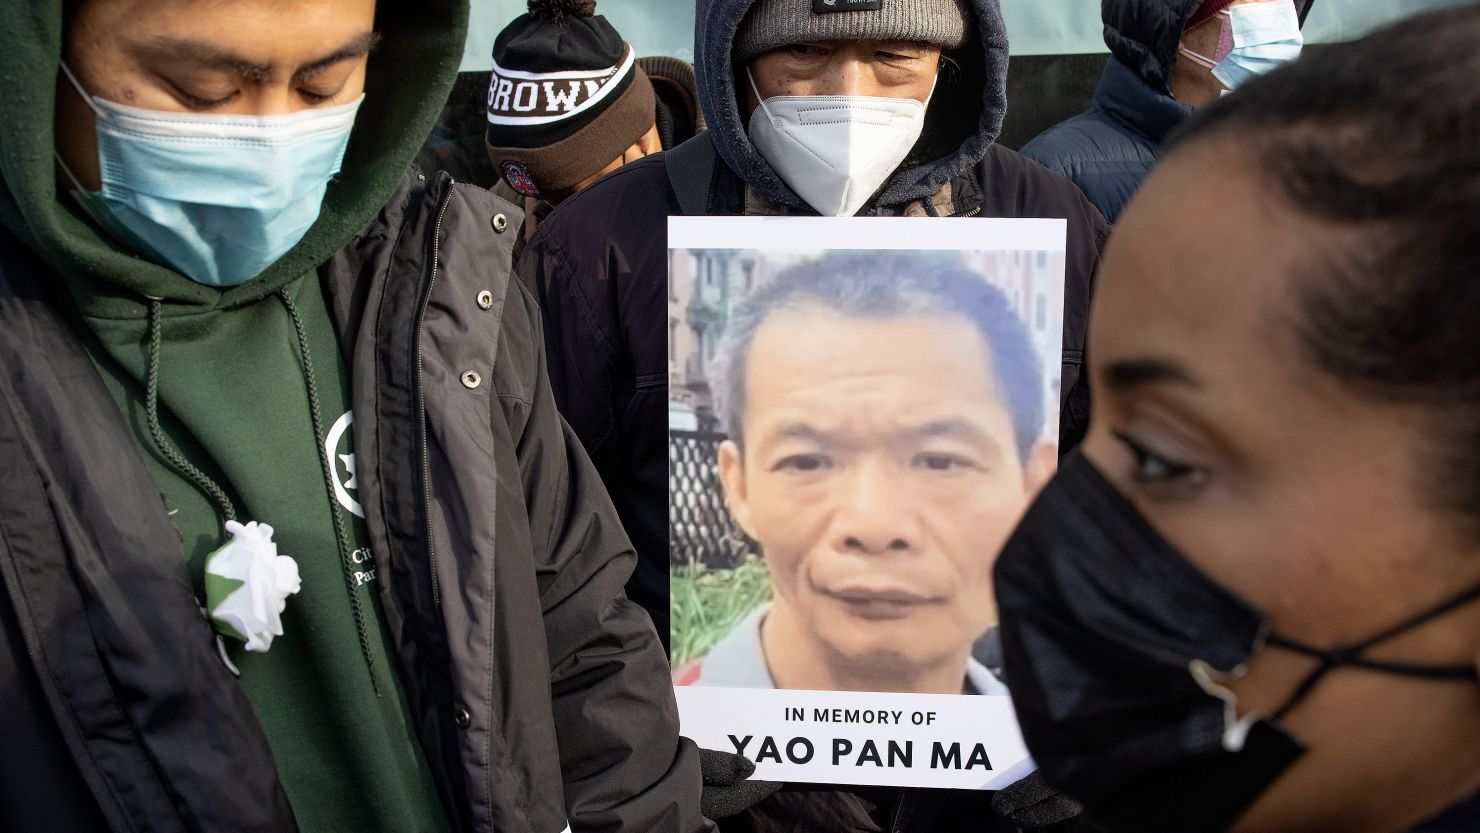 A memorial vigil was held for Yao Pan Mo on January 21, 2022 in Harlem, New York. 